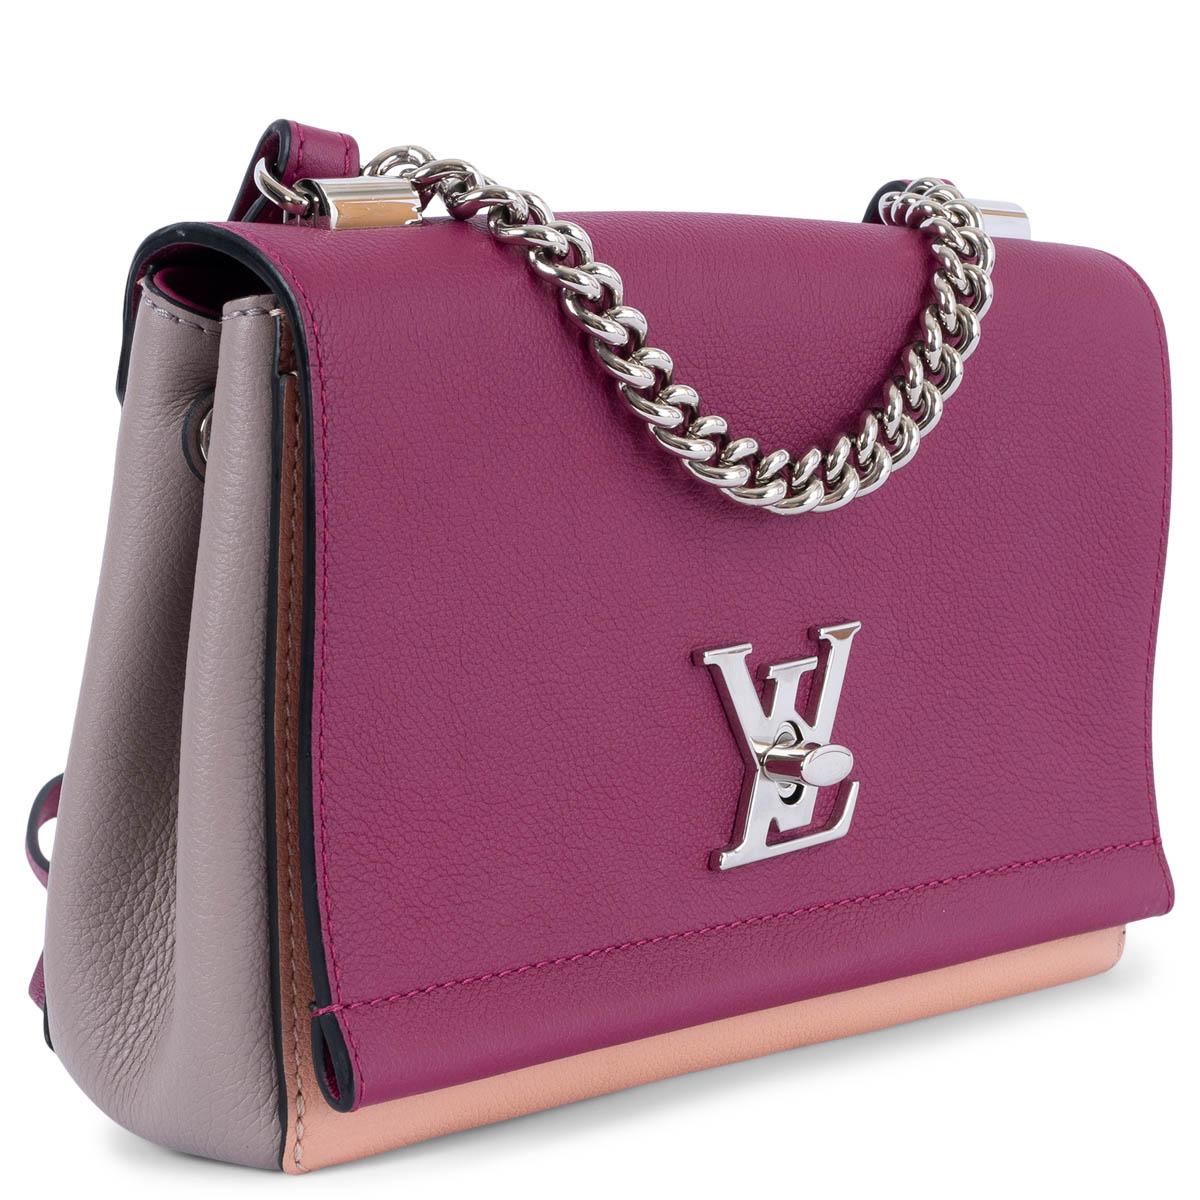 100% authentic Louis Vuitton Lockme II BB Chain Bag in Grape Venus (purple, coral and taupe) calfskin. The design features a silver chain top handle and an optional purple leather crossbody strap with added shoulder pad. The crossover flap opens